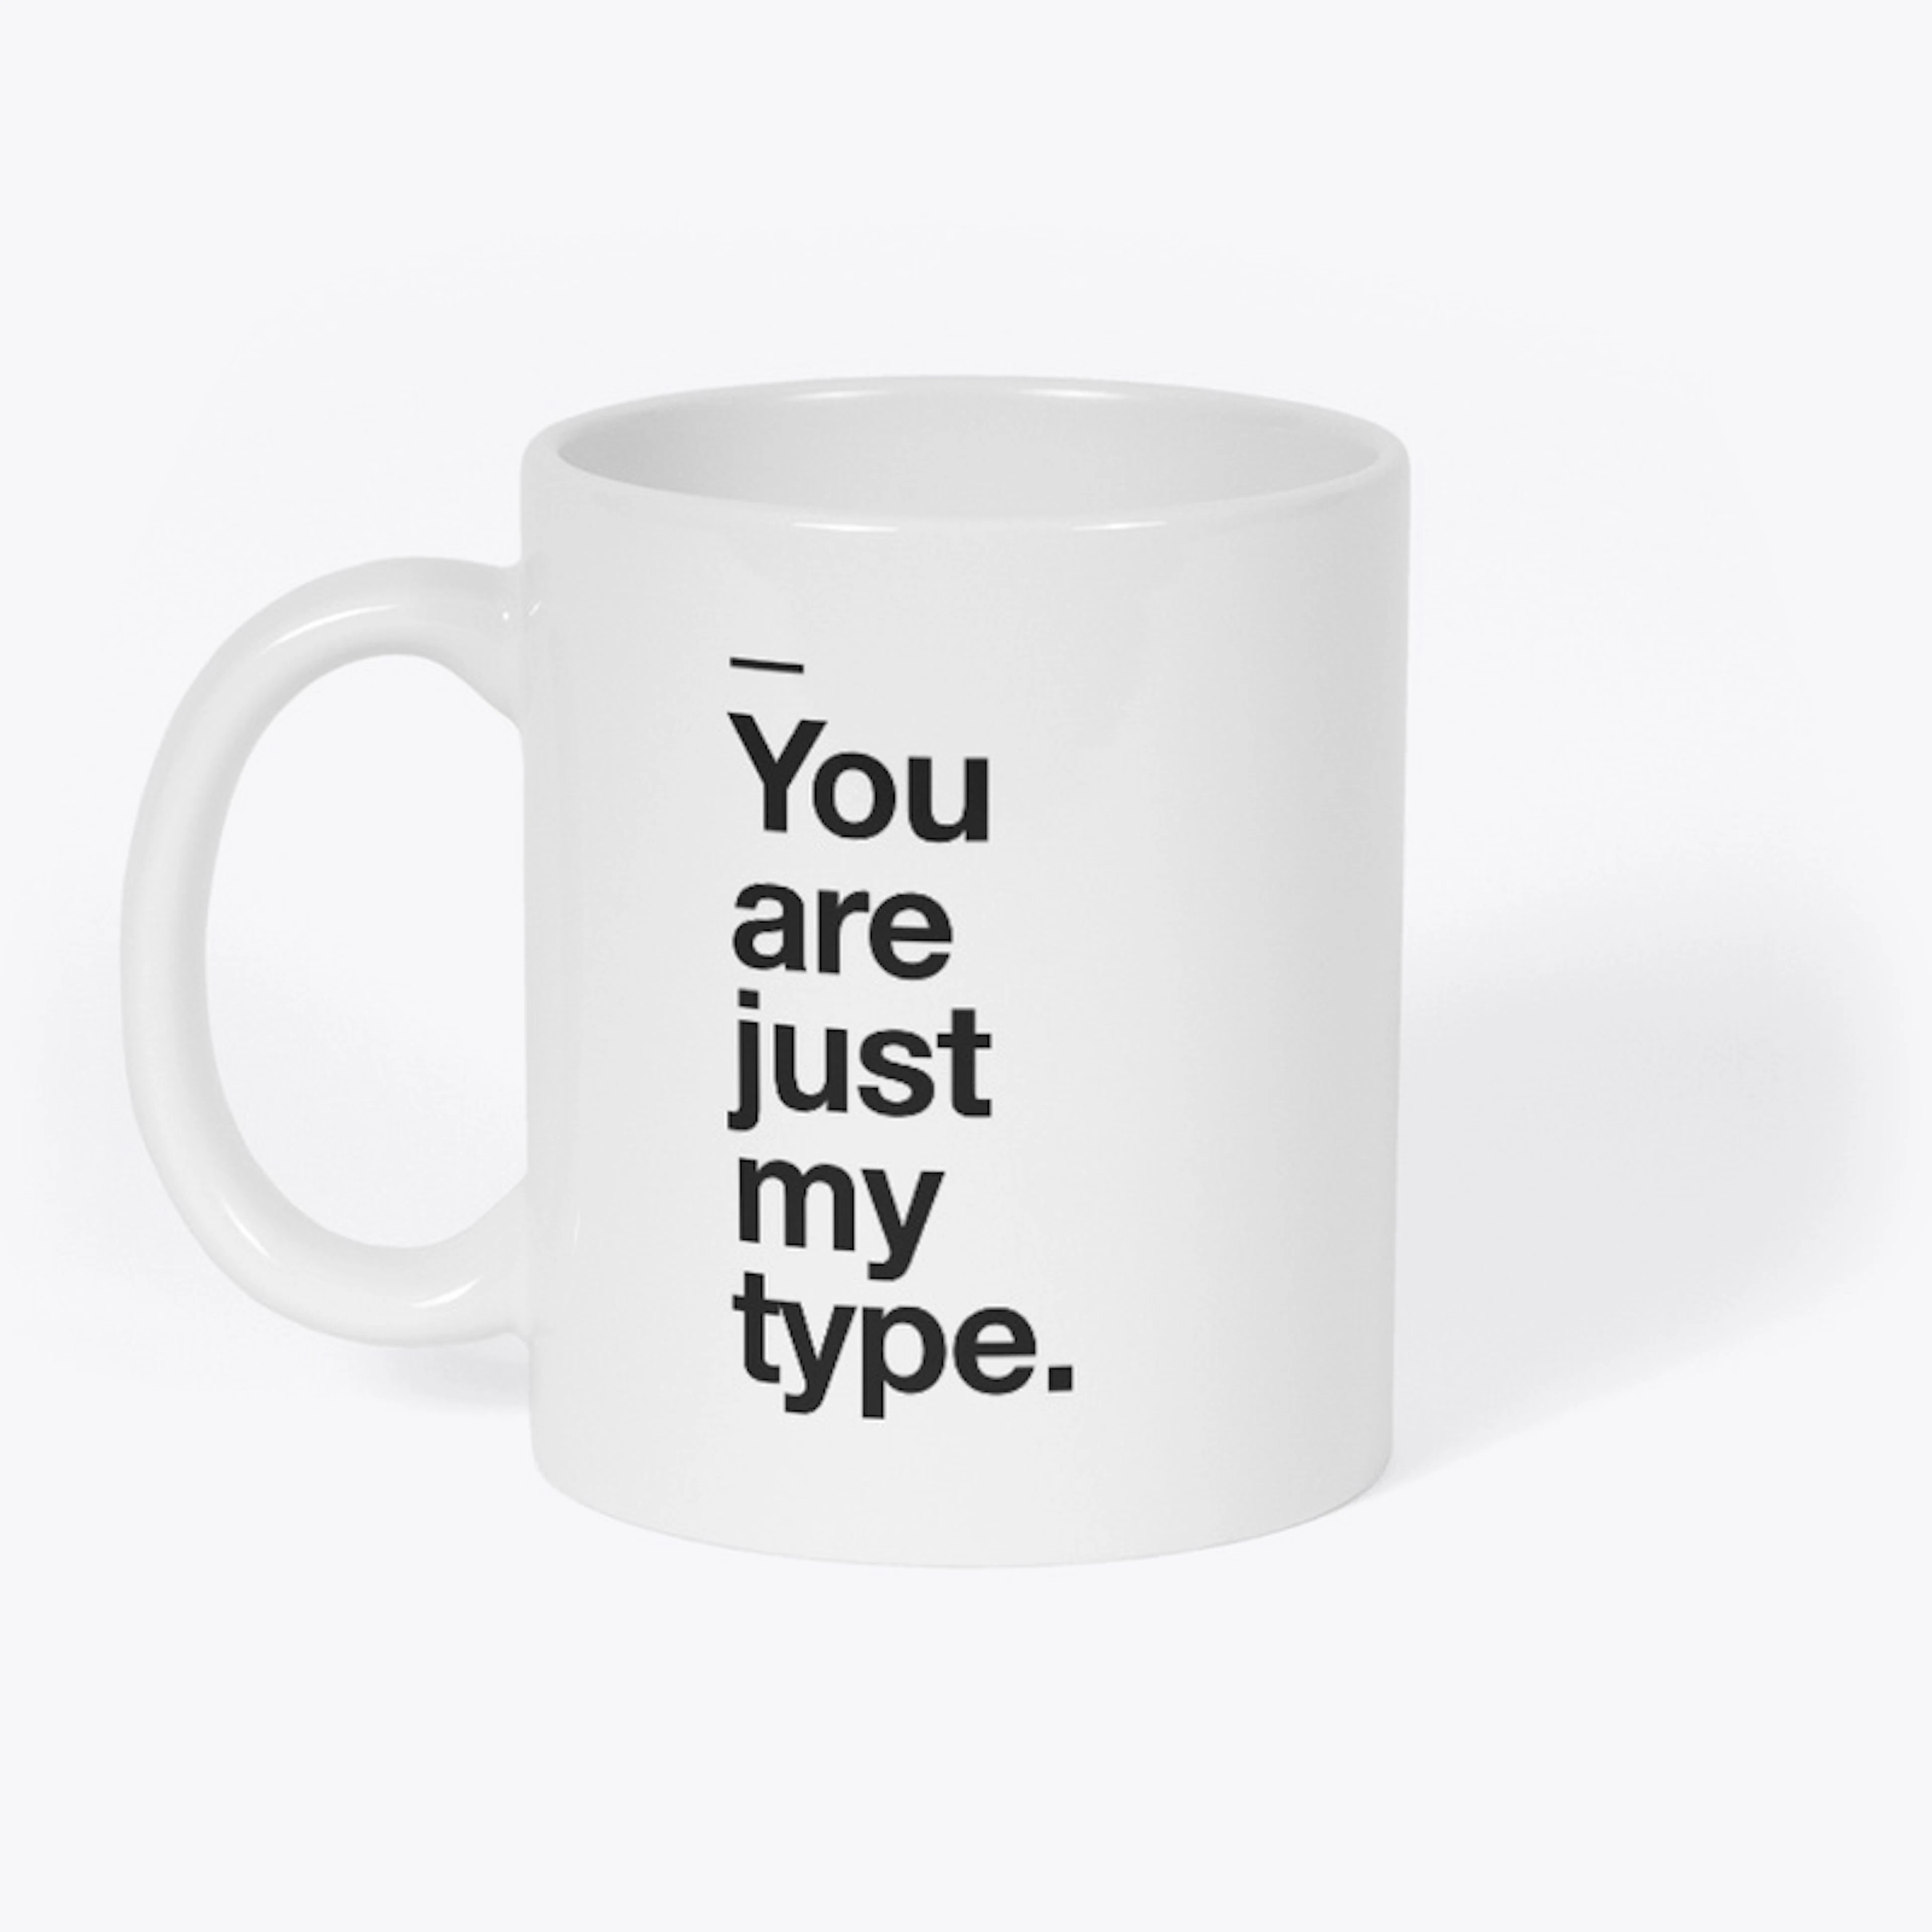 "You are just my type"